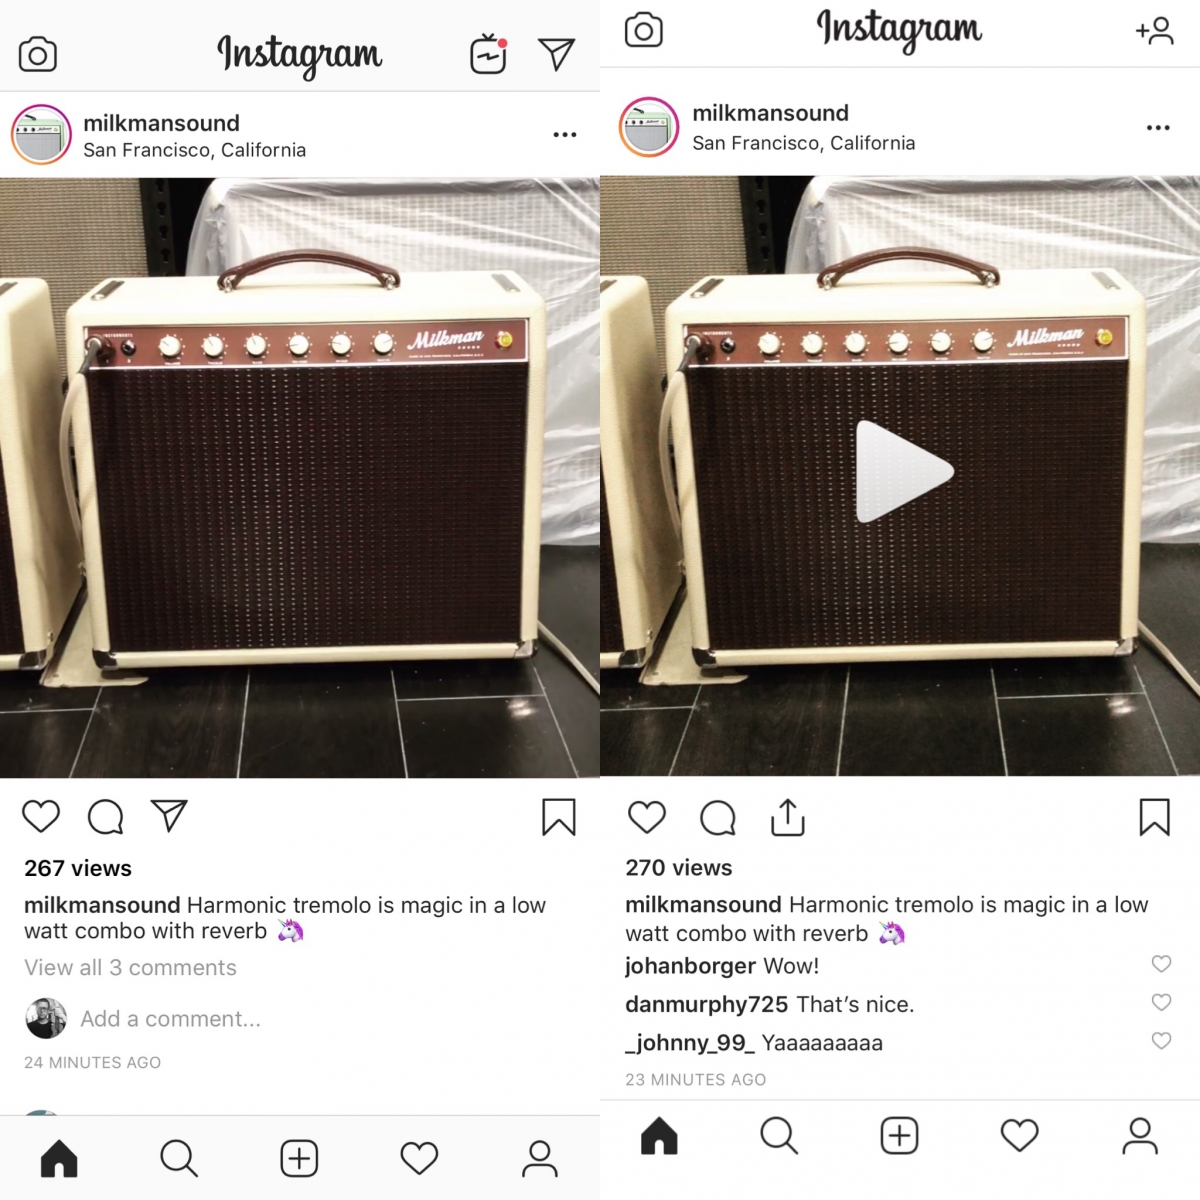 Side by side comparison of Instagram app and website